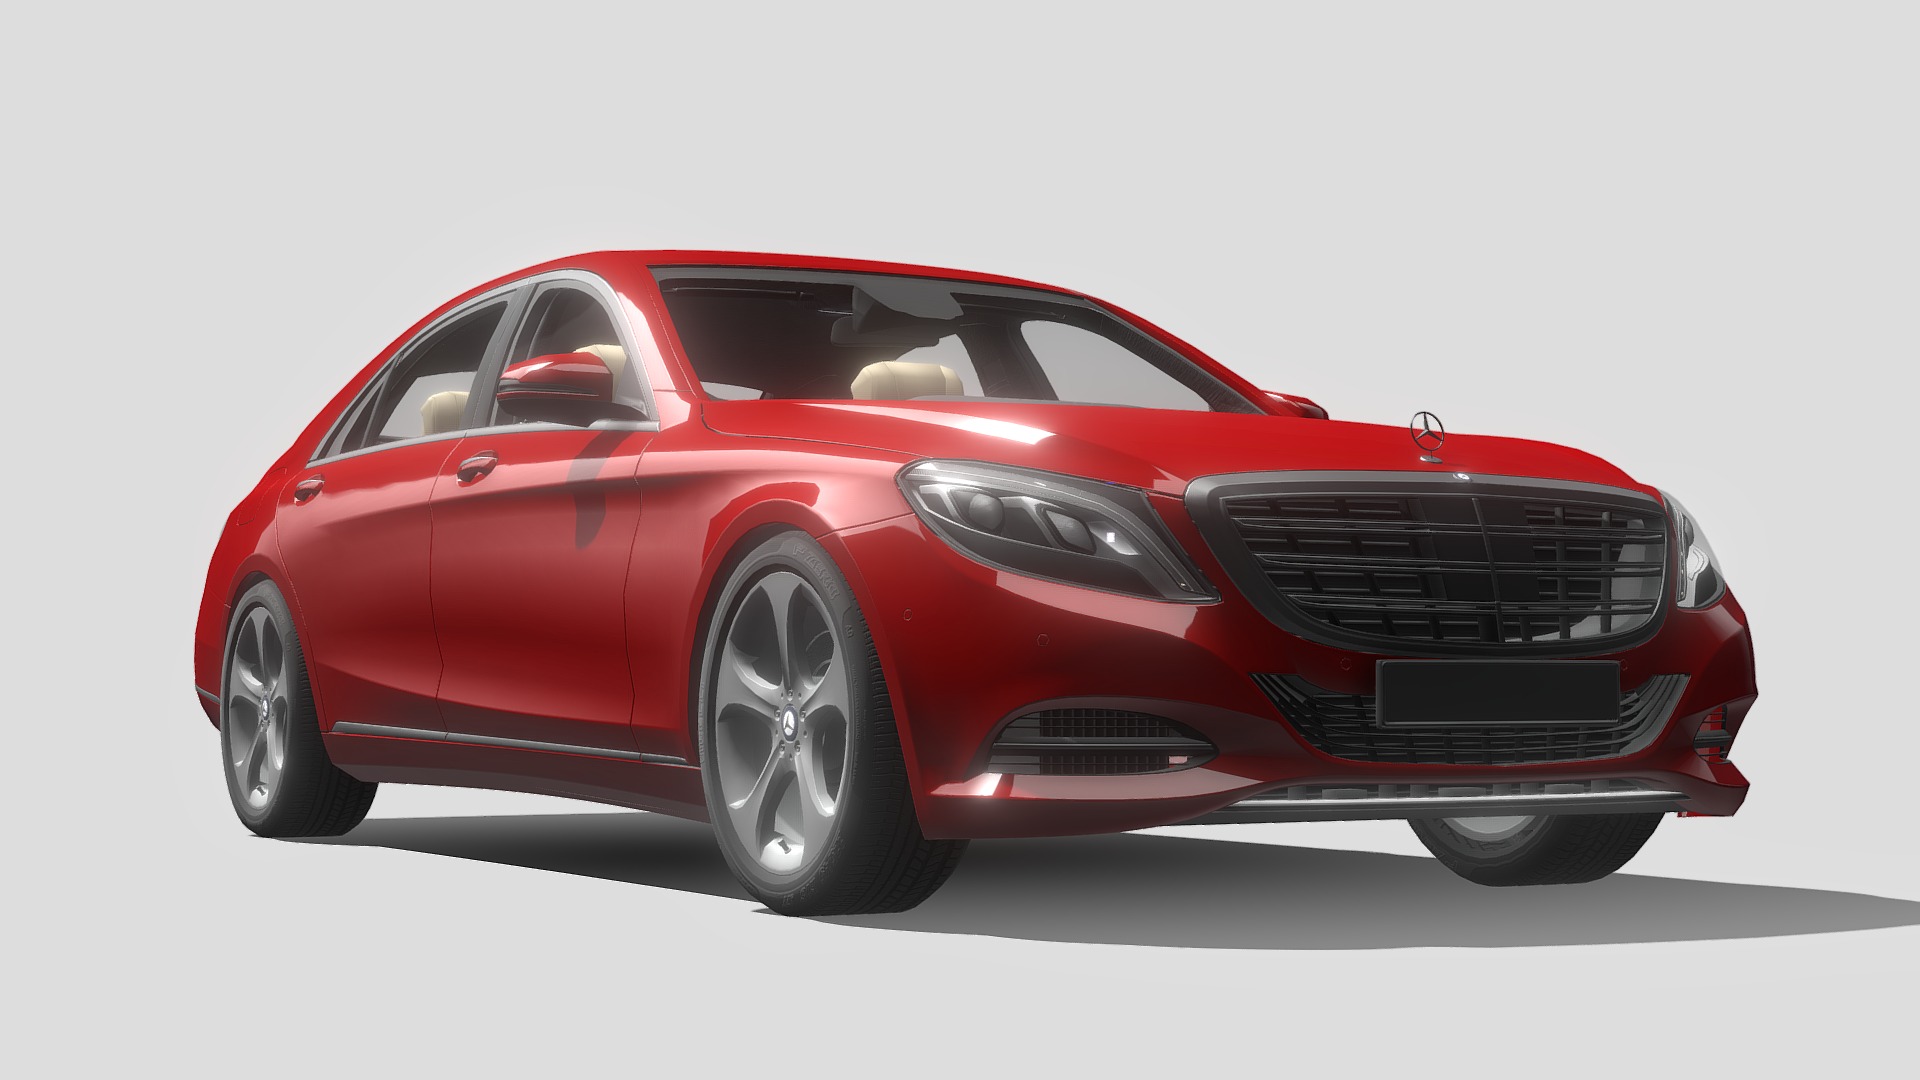 3D model Mercedes Benz Luxurycar Model - This is a 3D model of the Mercedes Benz Luxurycar Model. The 3D model is about a red sports car.